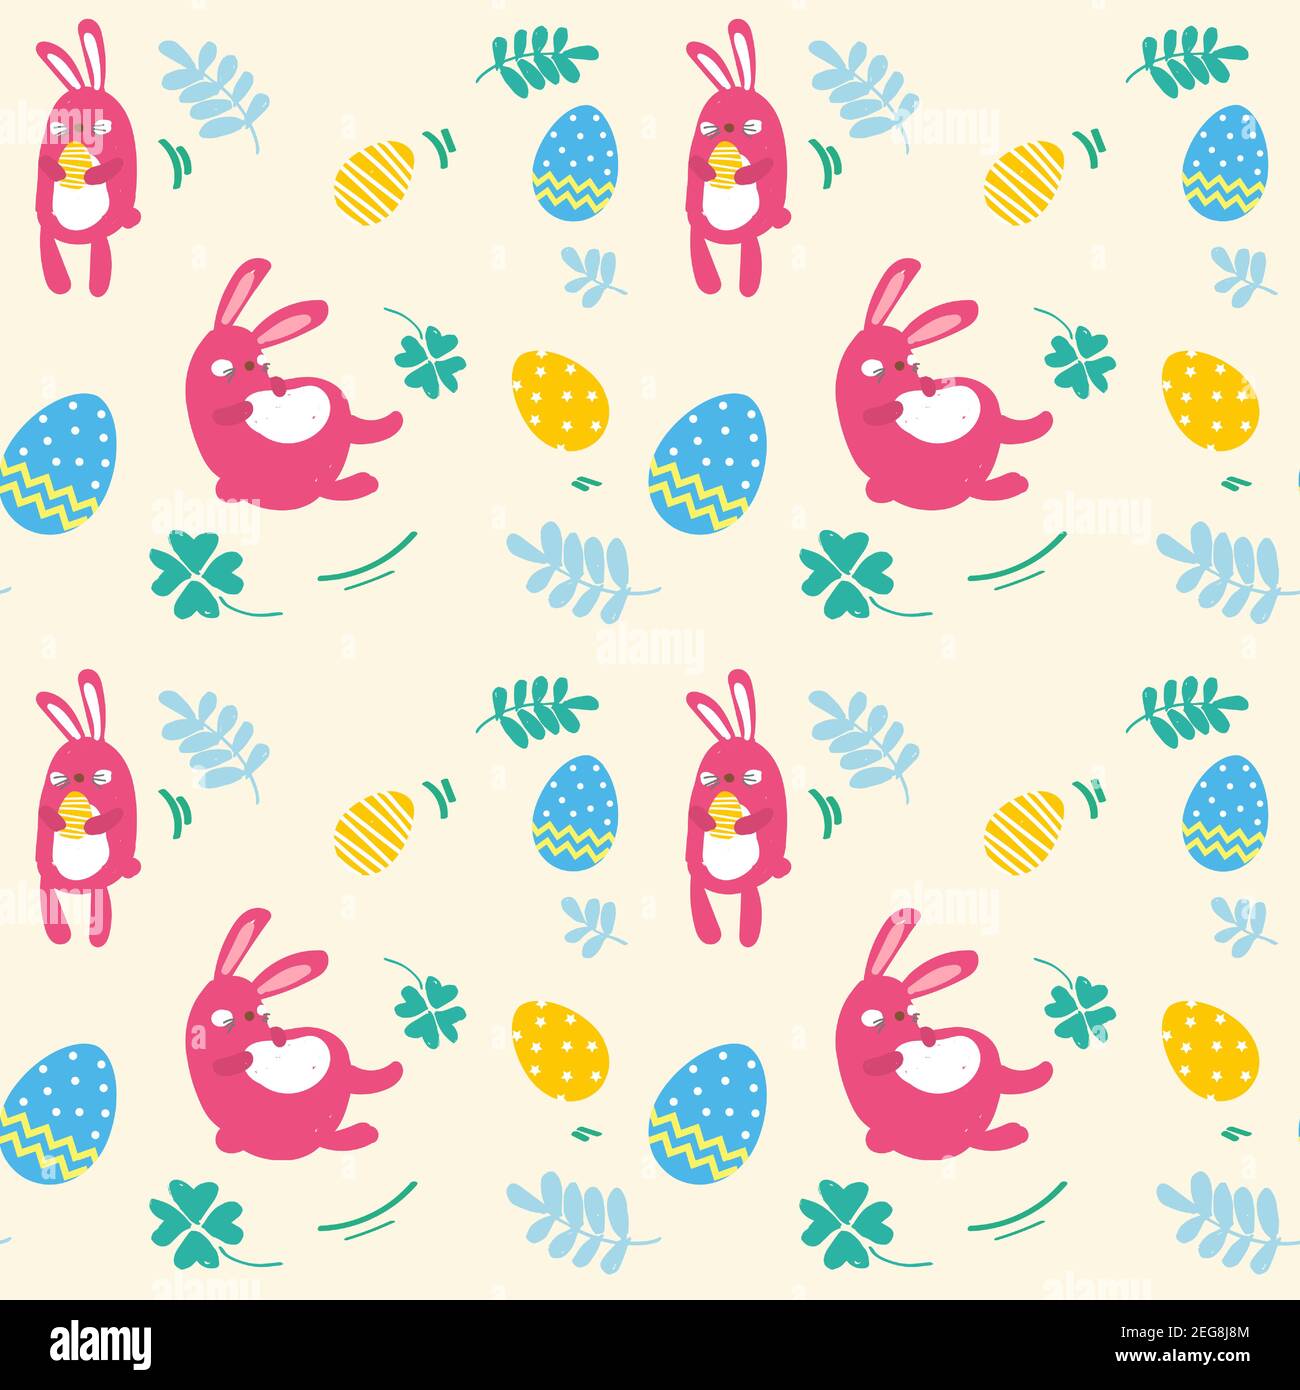 Bunny Stock Vector Images - Alamy